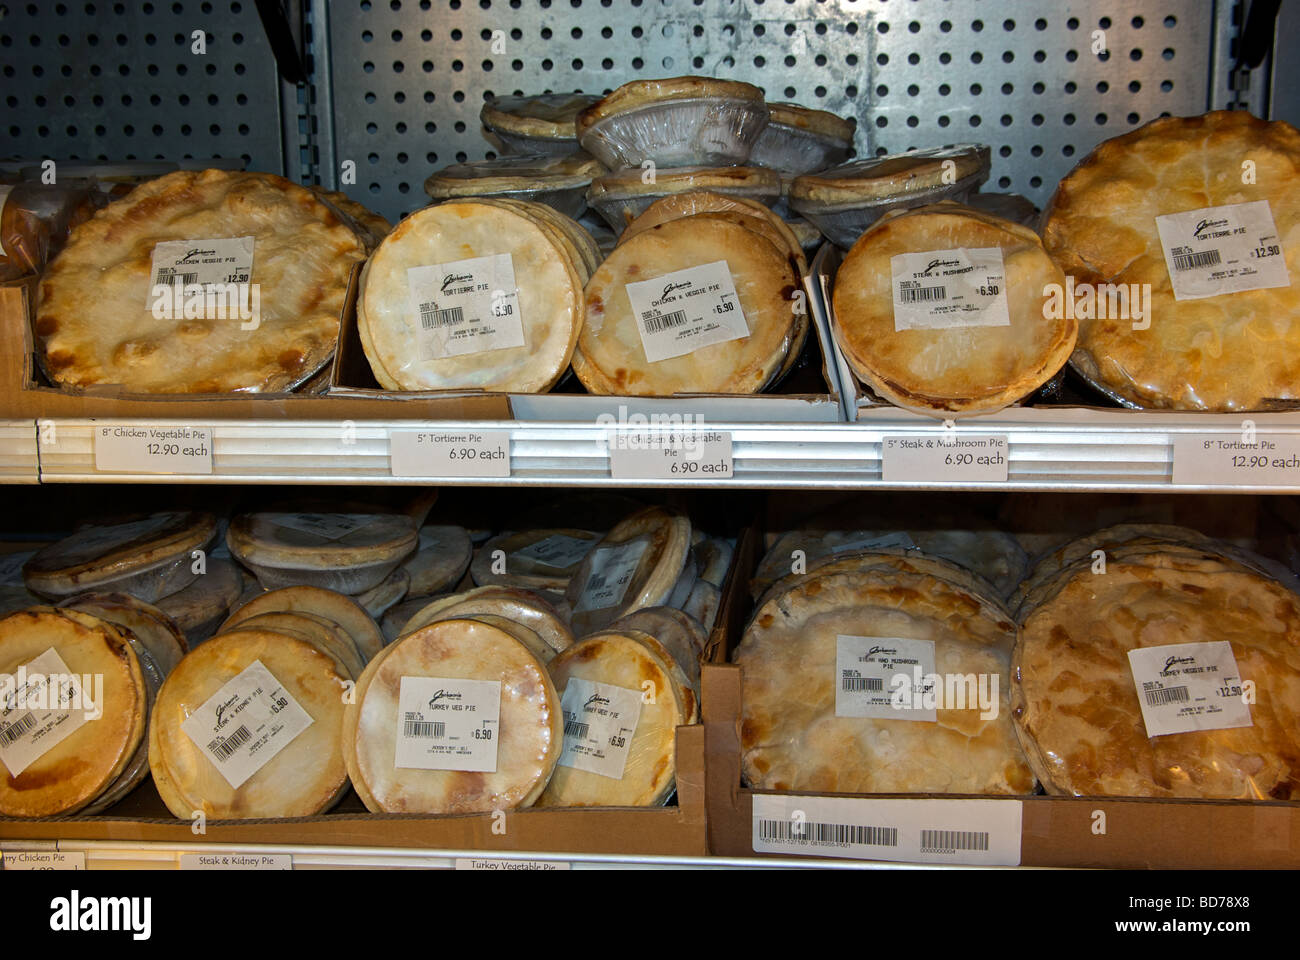 Frozen savoury meat pies in upright display freezer case Stock Photo